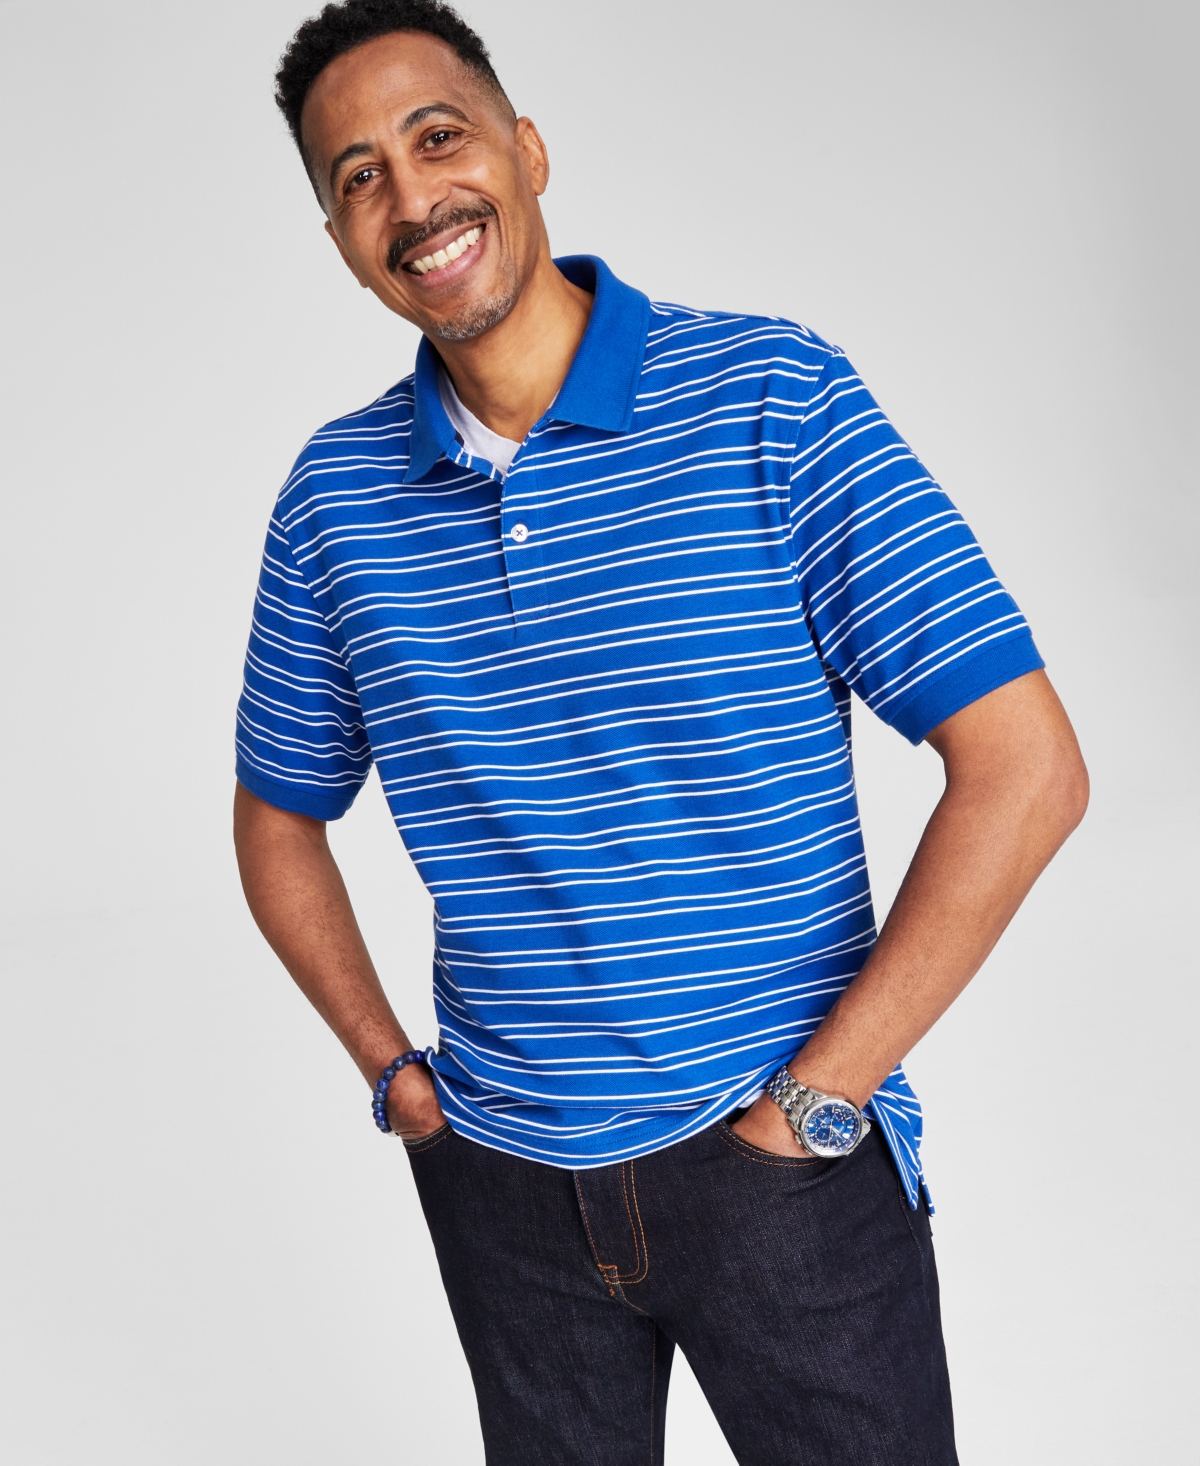 Men's Striped Short-Sleeve Polo Shirt, Created for Macy's - Royal Blue